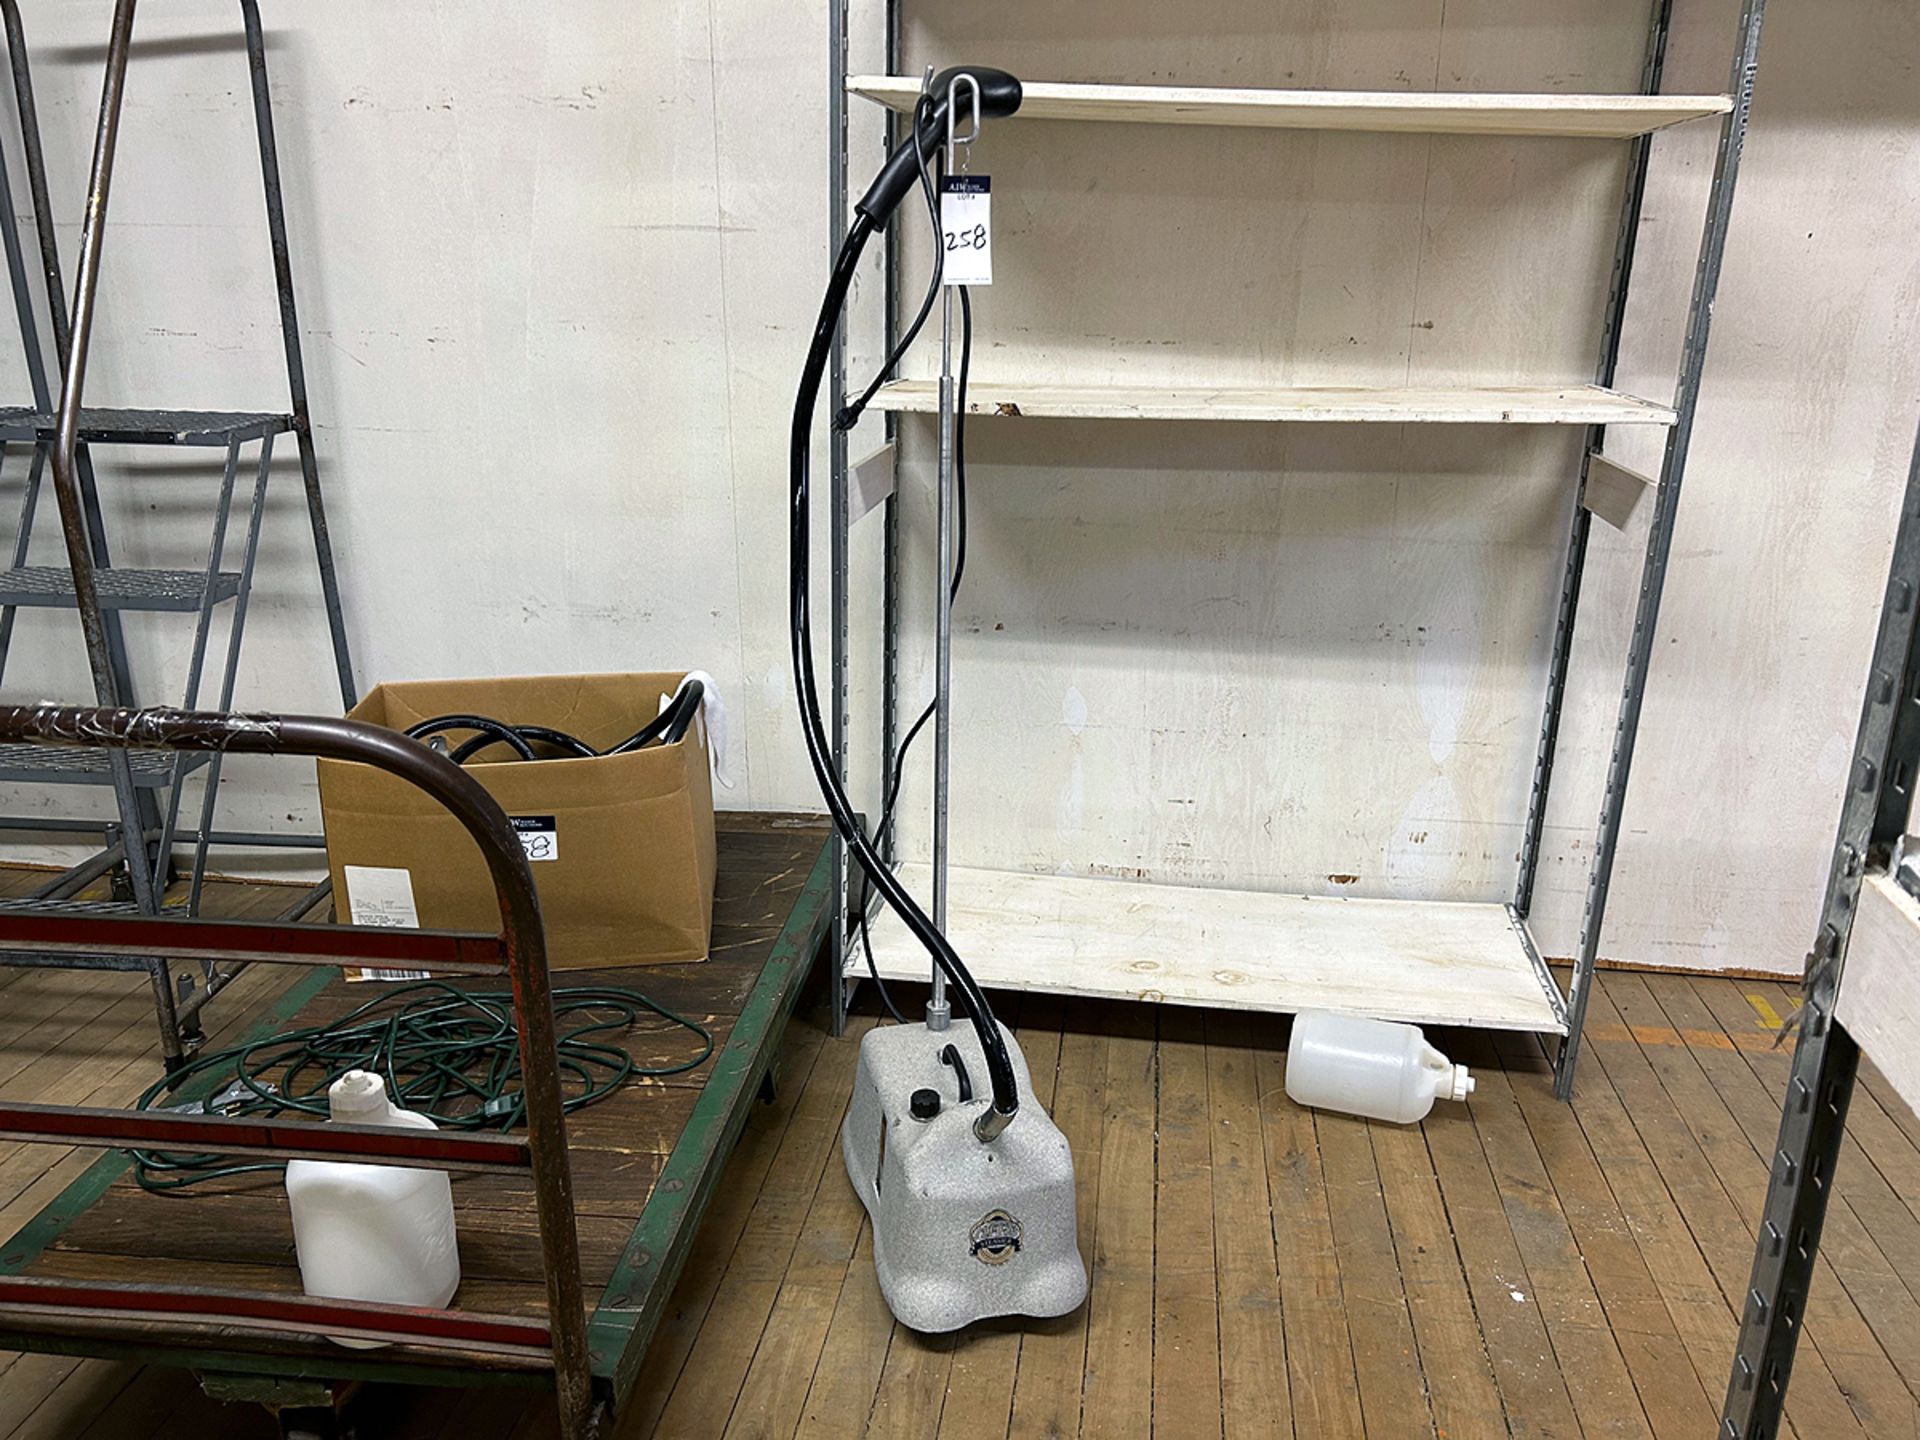 Jiffy J4000 Garment Steamer with Box of Components